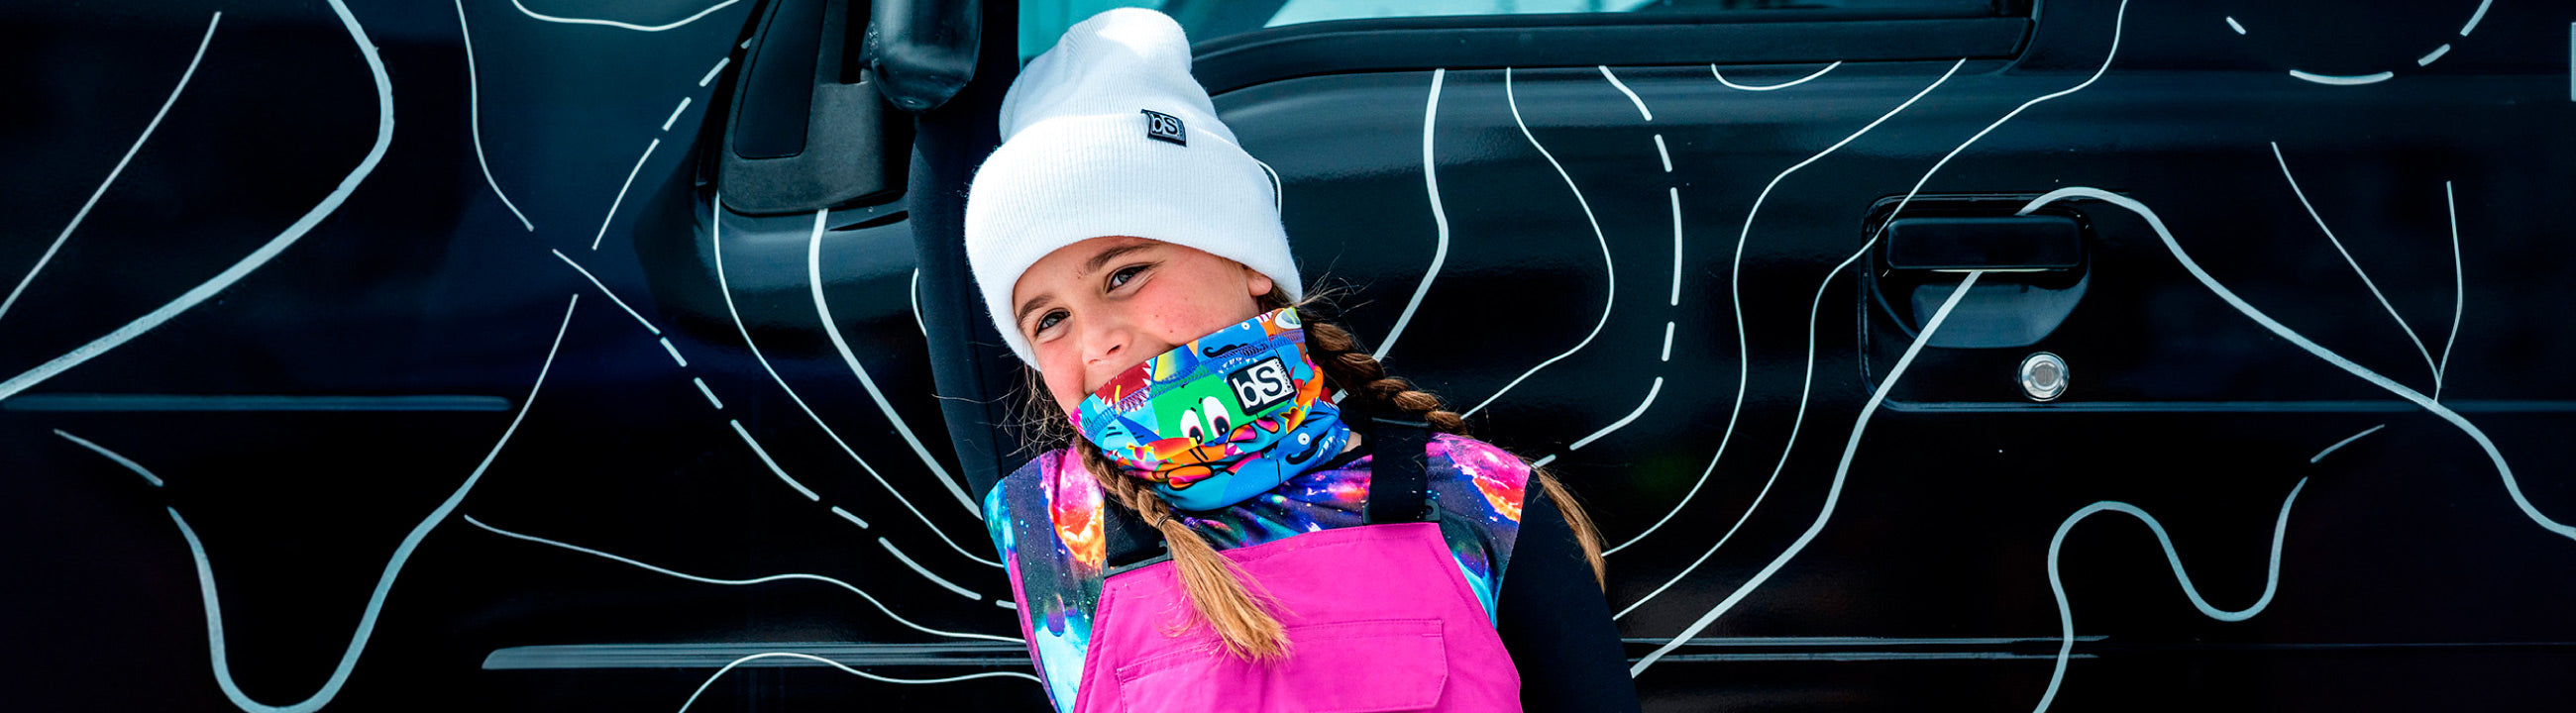 Kids Neck Warmers & Gear | Weather Covers BlackStrap® Cold 